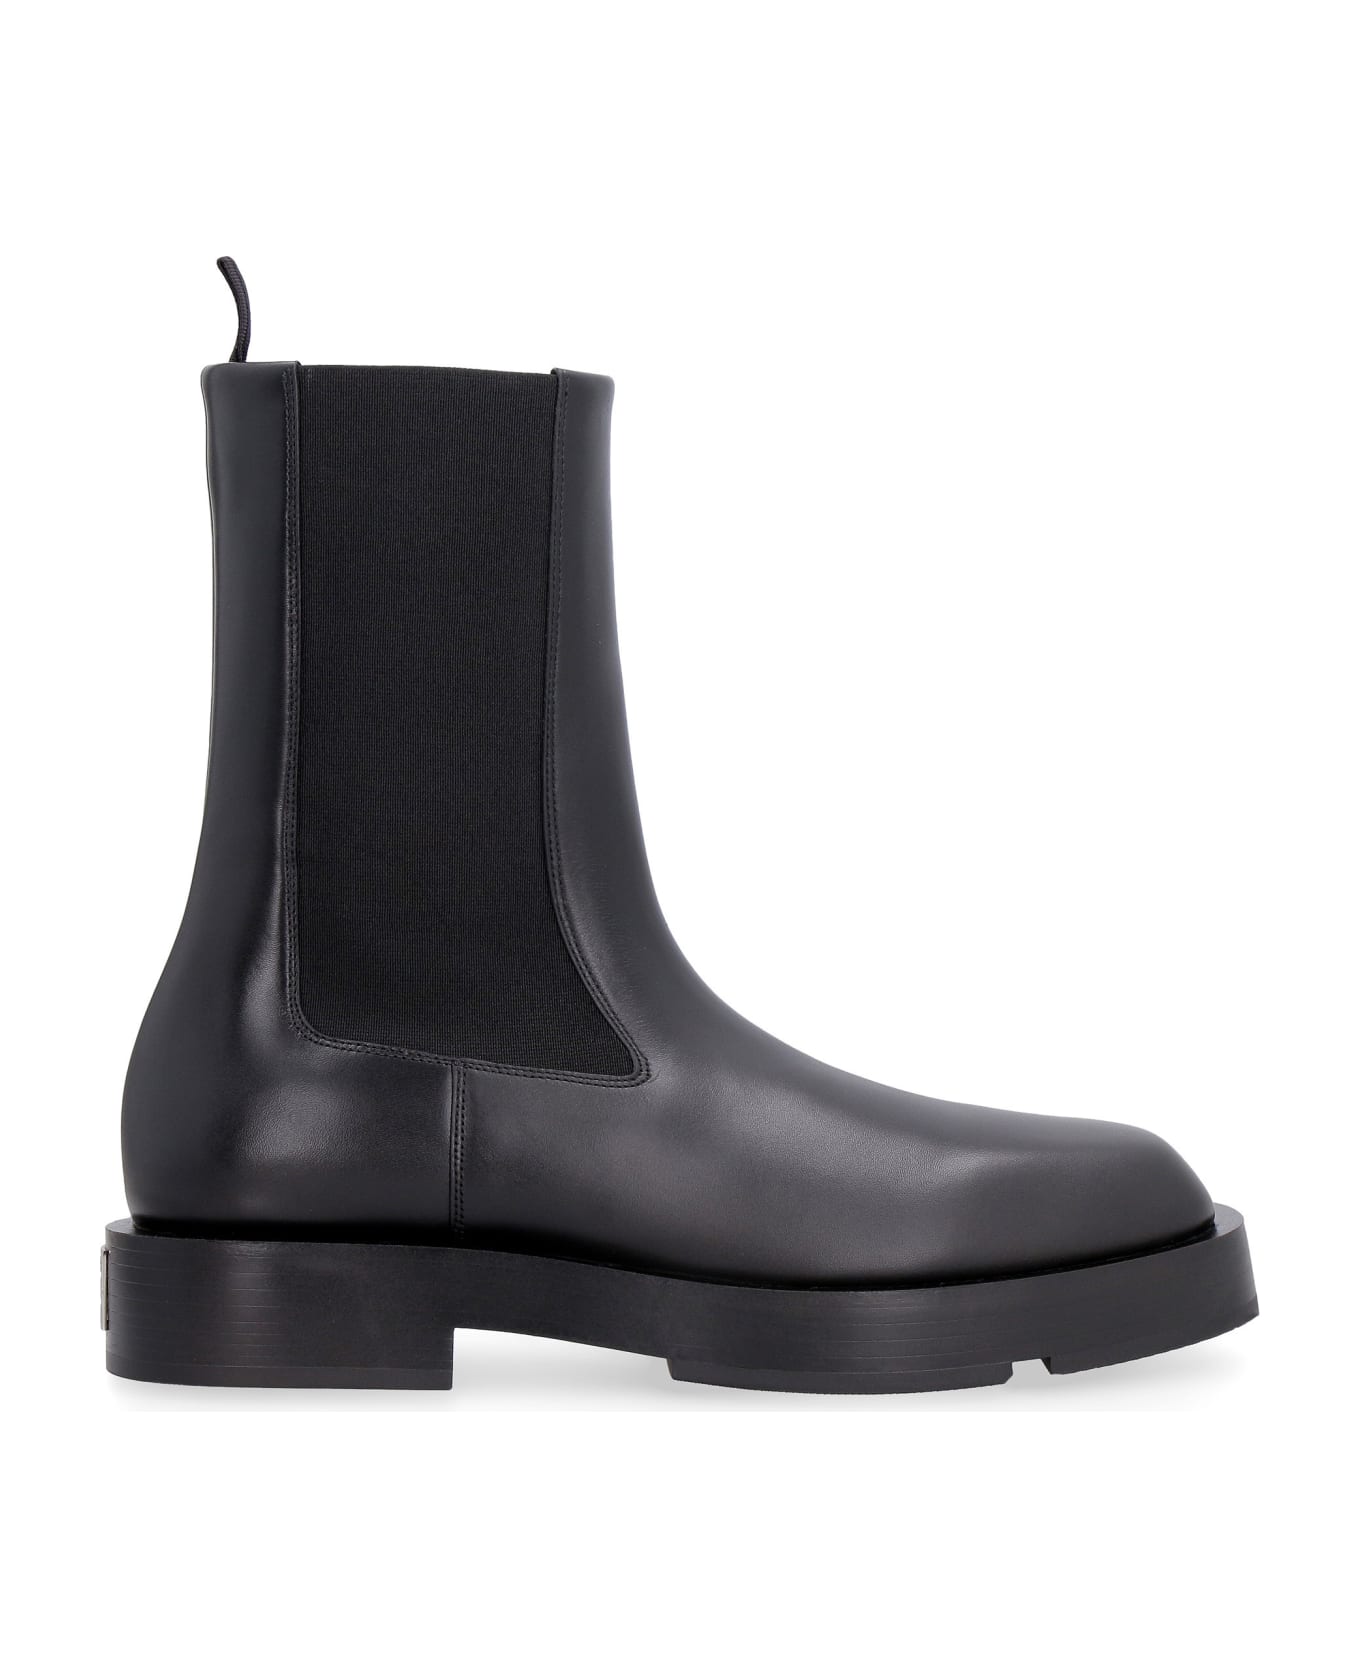 Givenchy Leather Chelsea Boots - black ブーツ